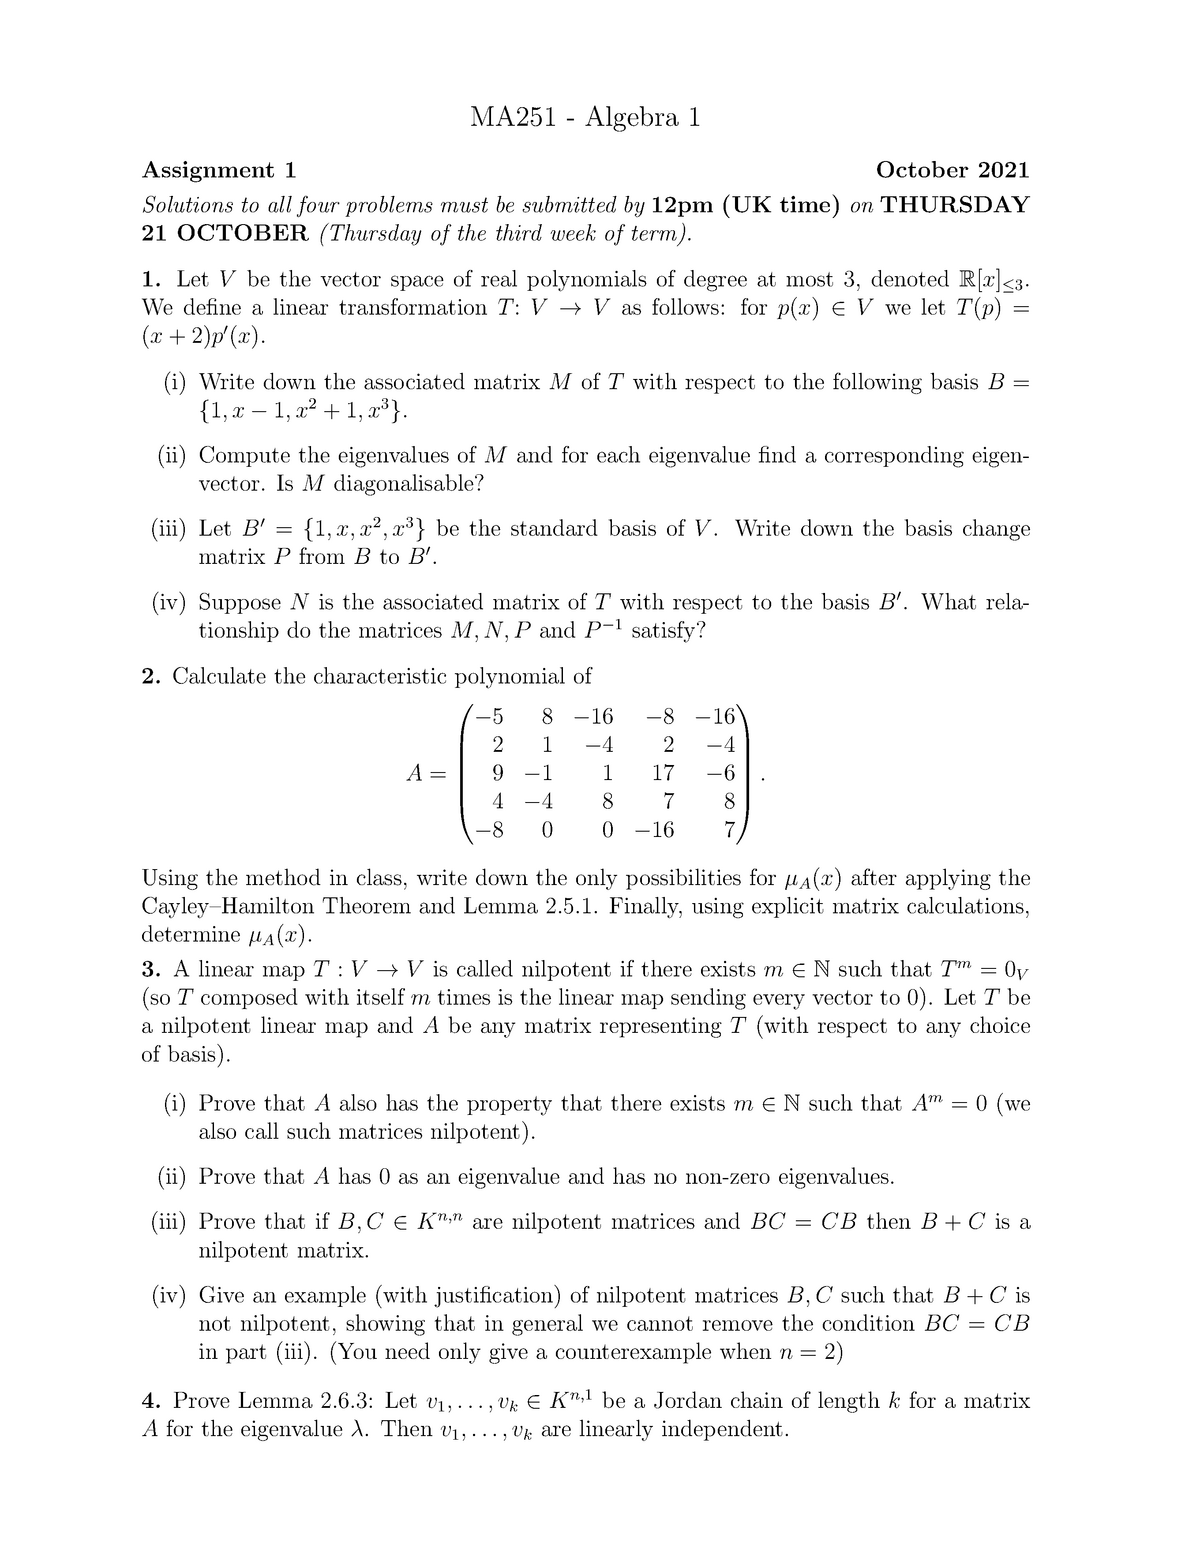 algebra 1 assignment find each product answers